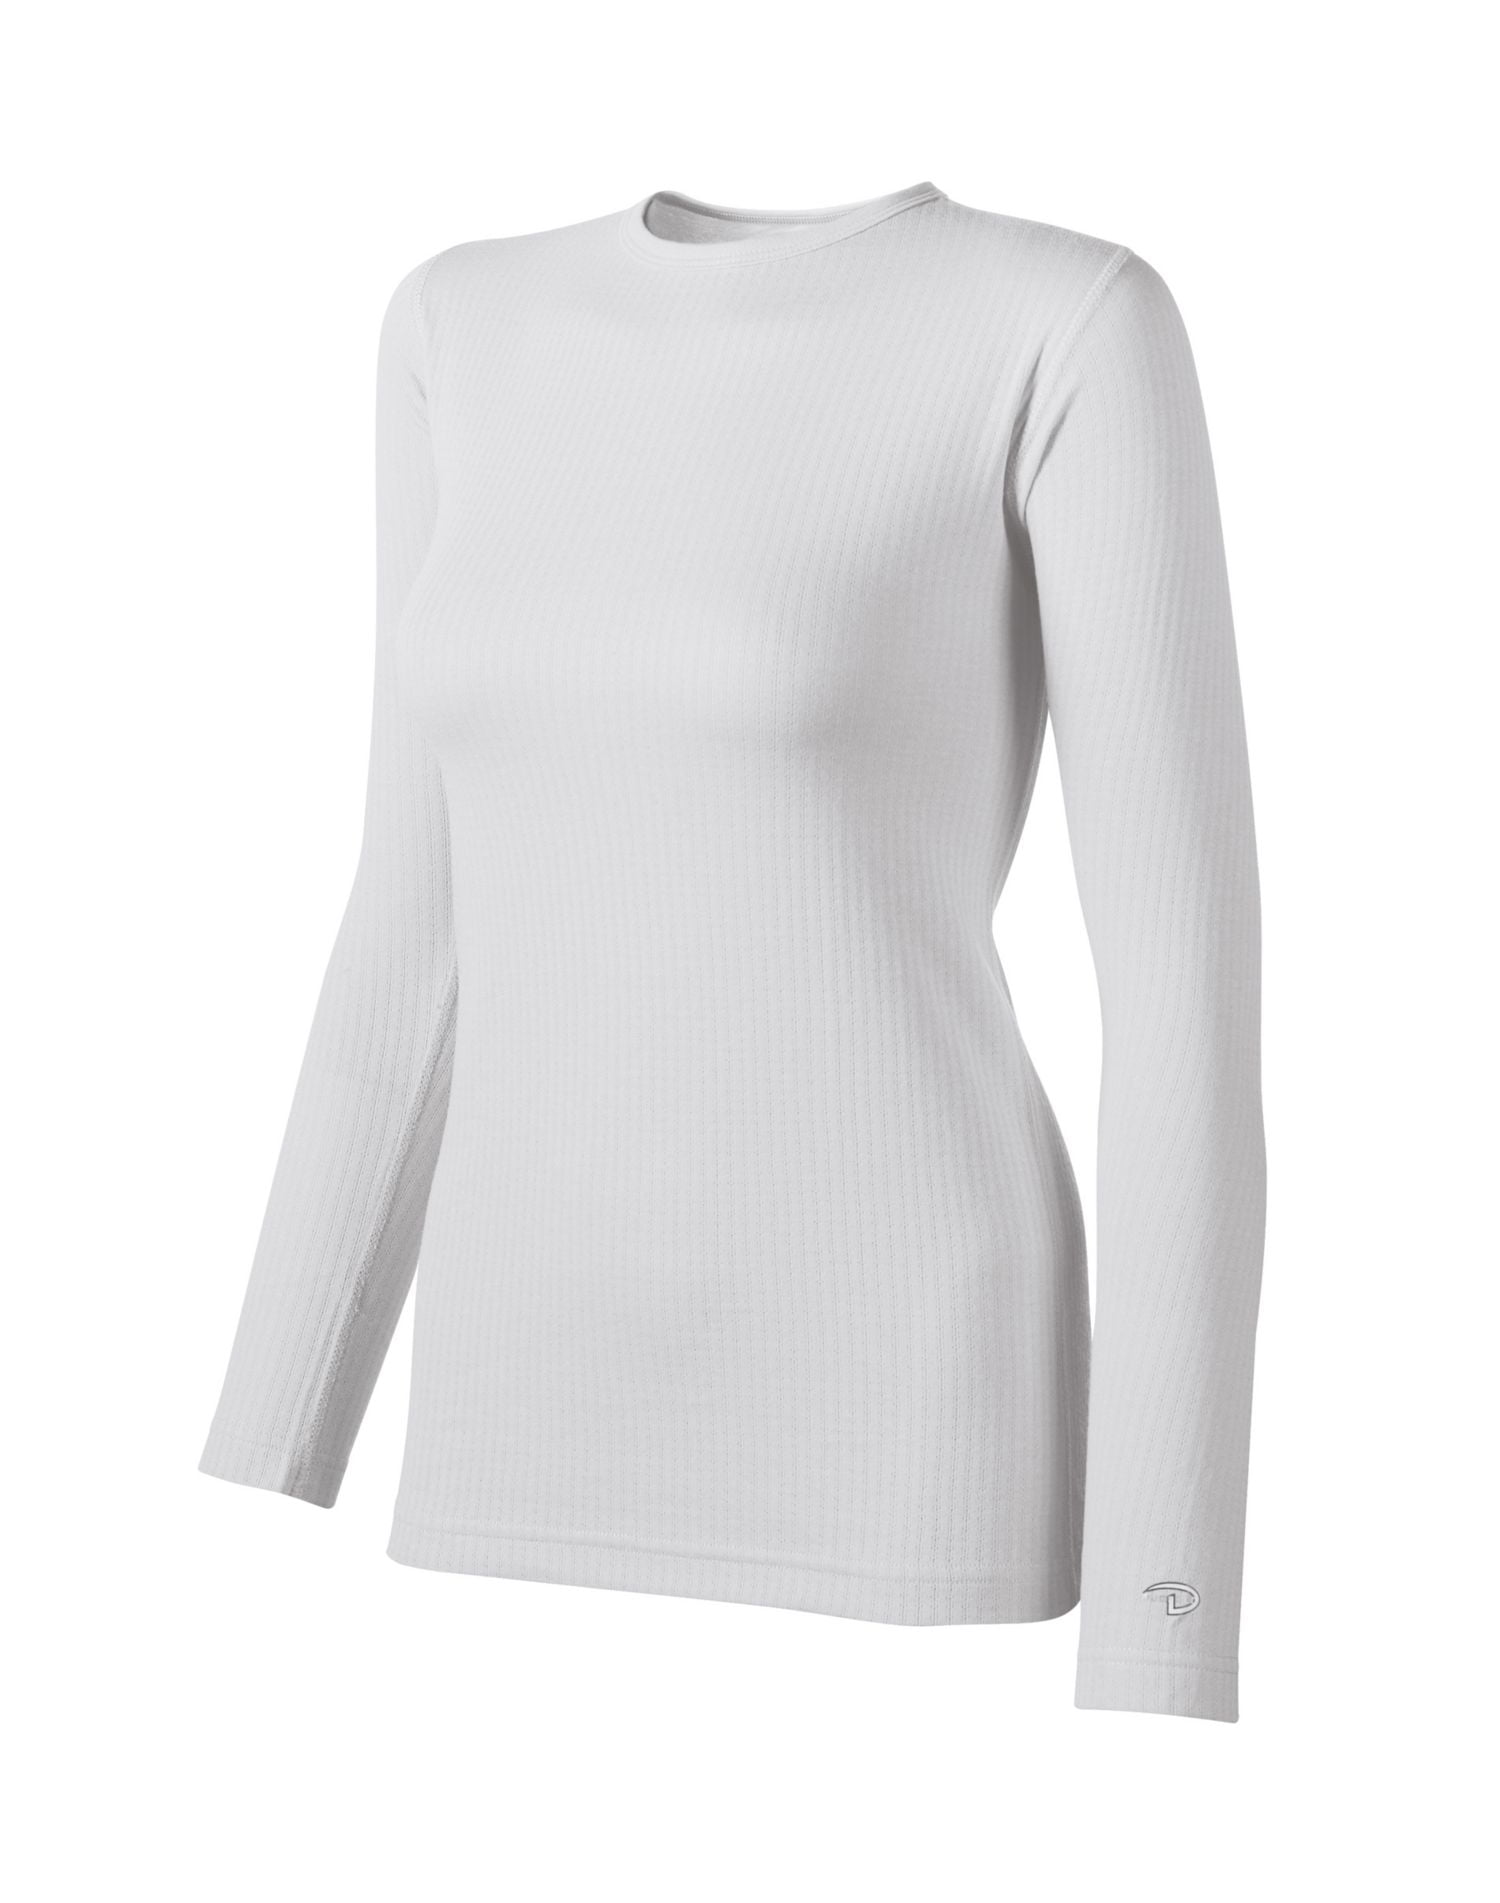 duofold thermals womens